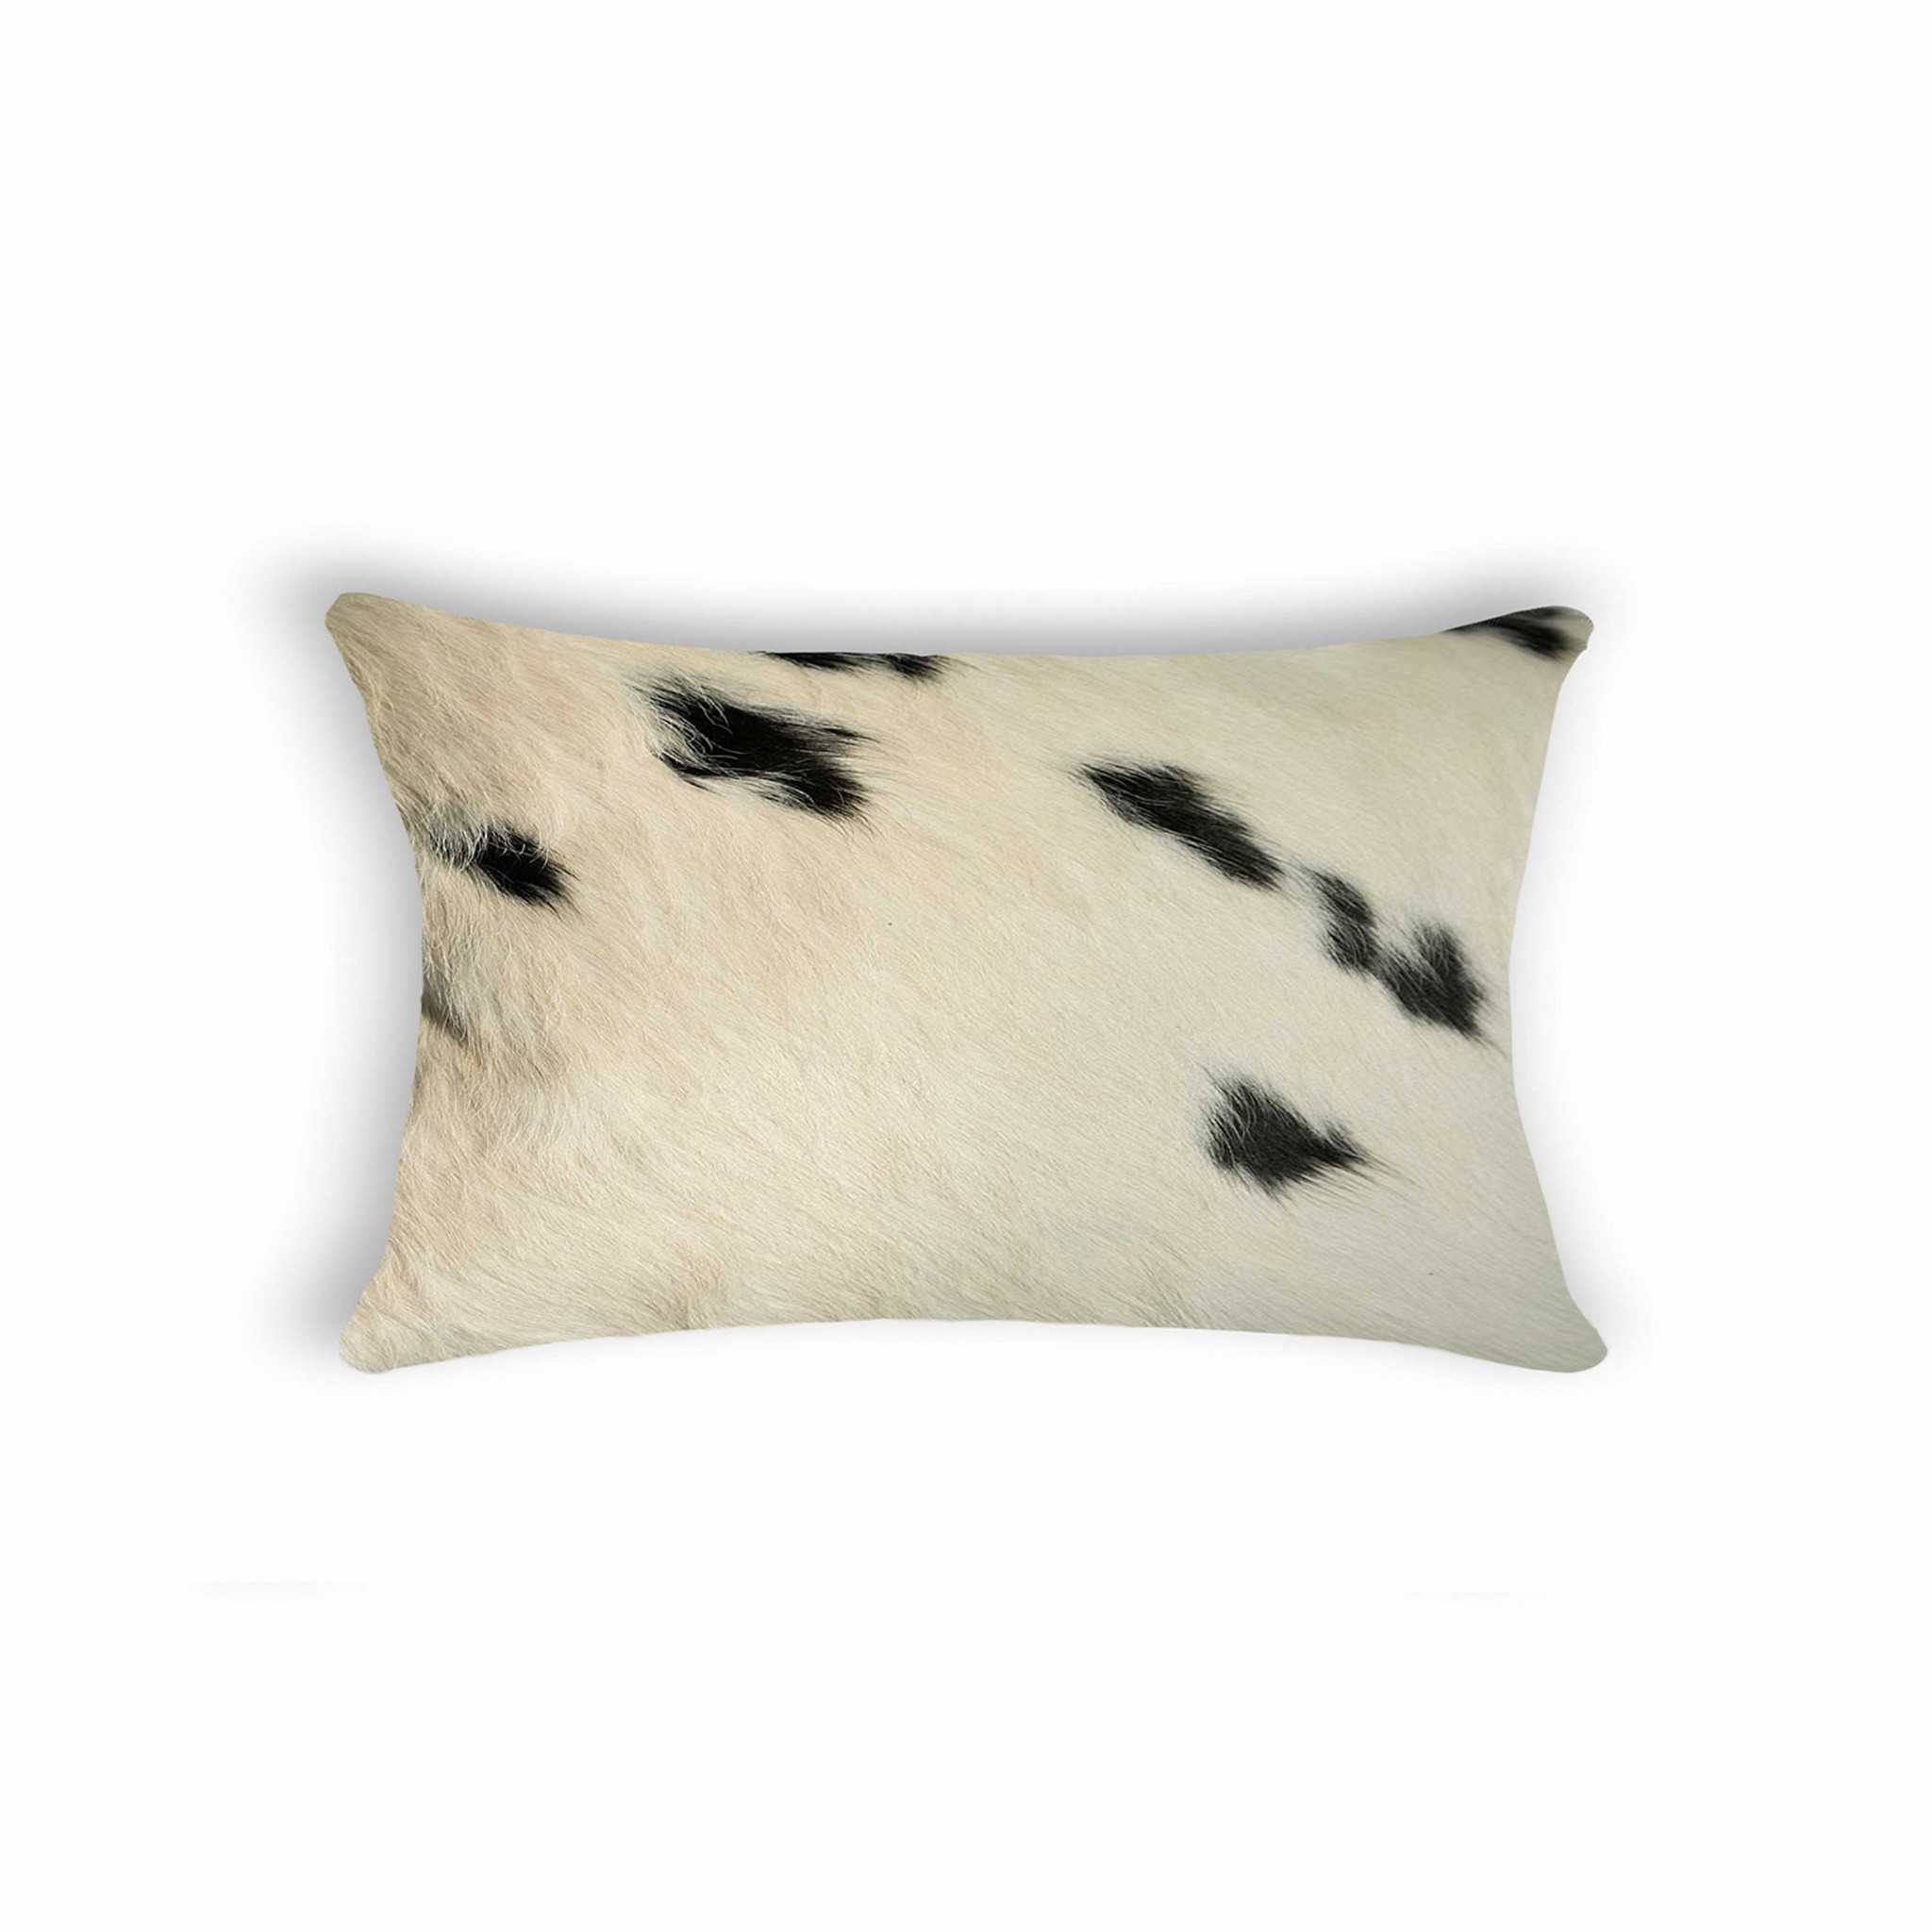 12" x 20" x 5" White And Black Cowhide - Pillow